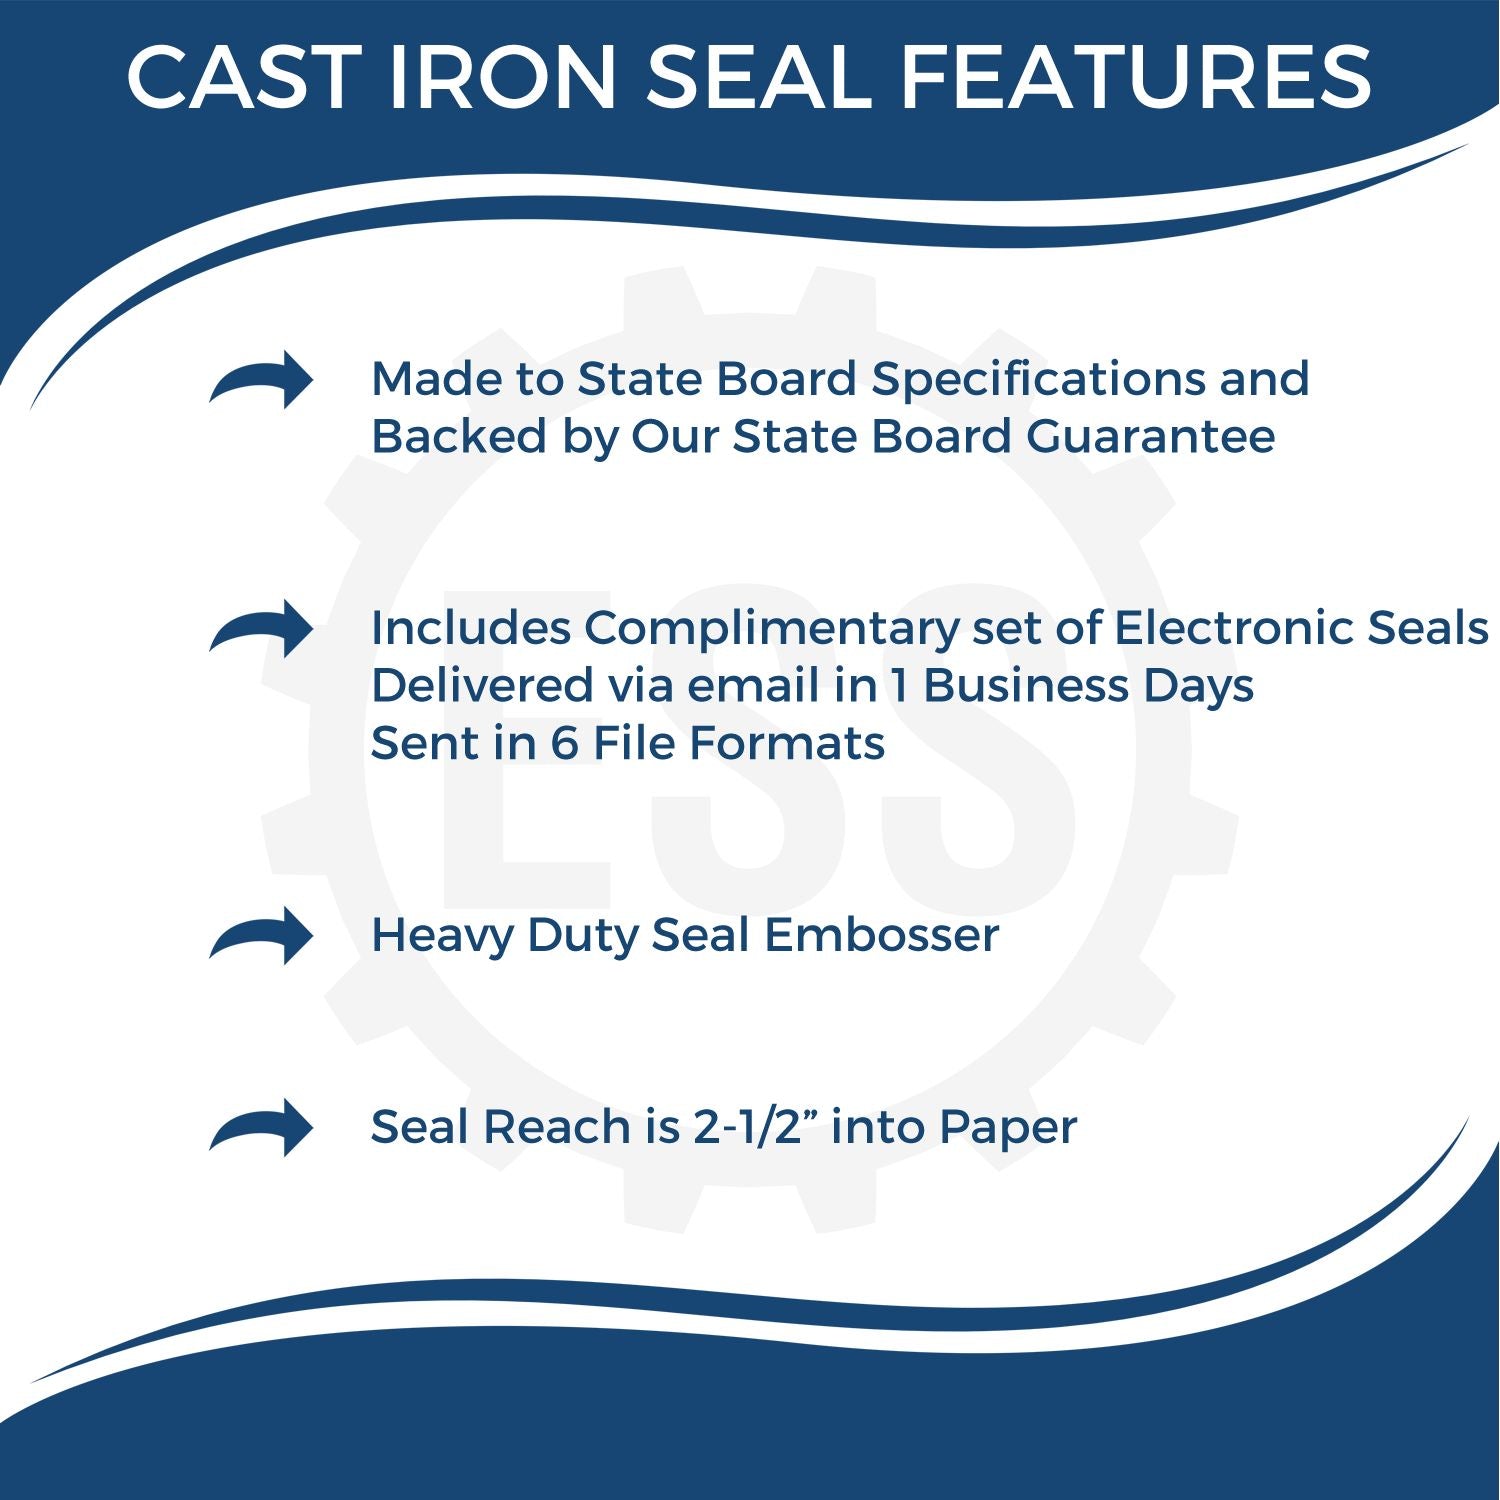 The main image for the Heavy Duty Cast Iron Kentucky Engineer Seal Embosser depicting a sample of the imprint and electronic files